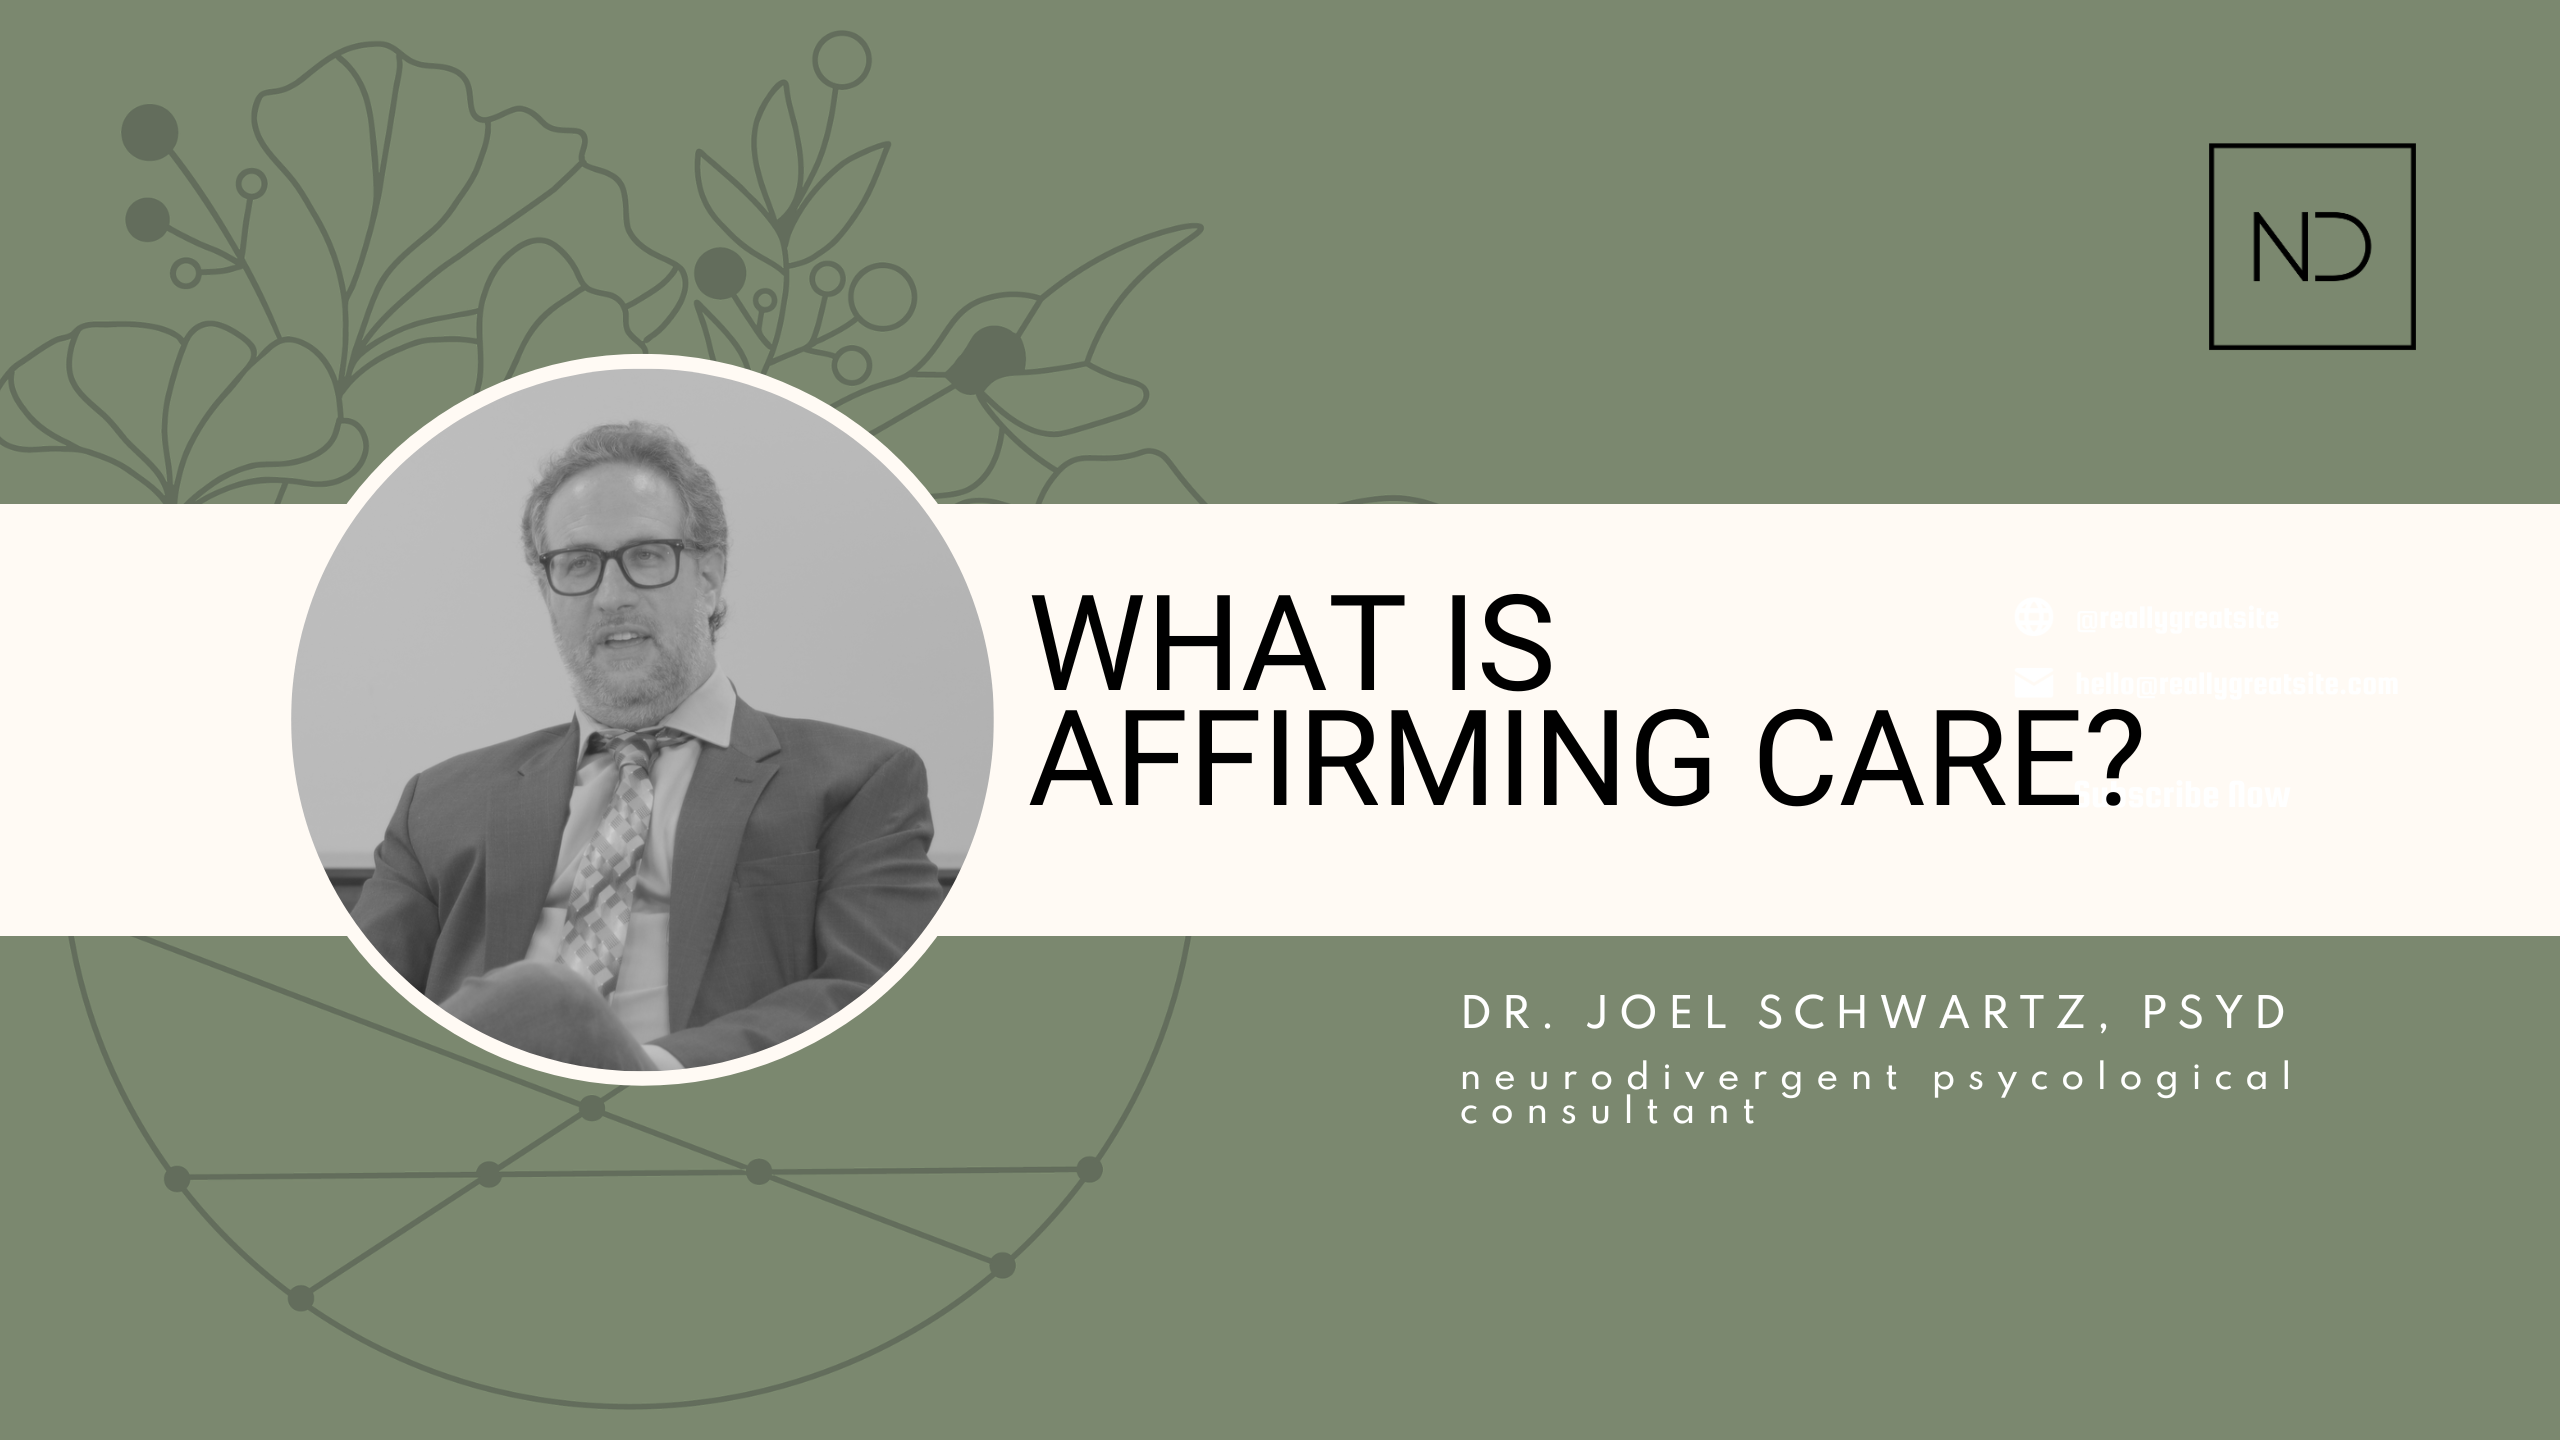 What is affirming care